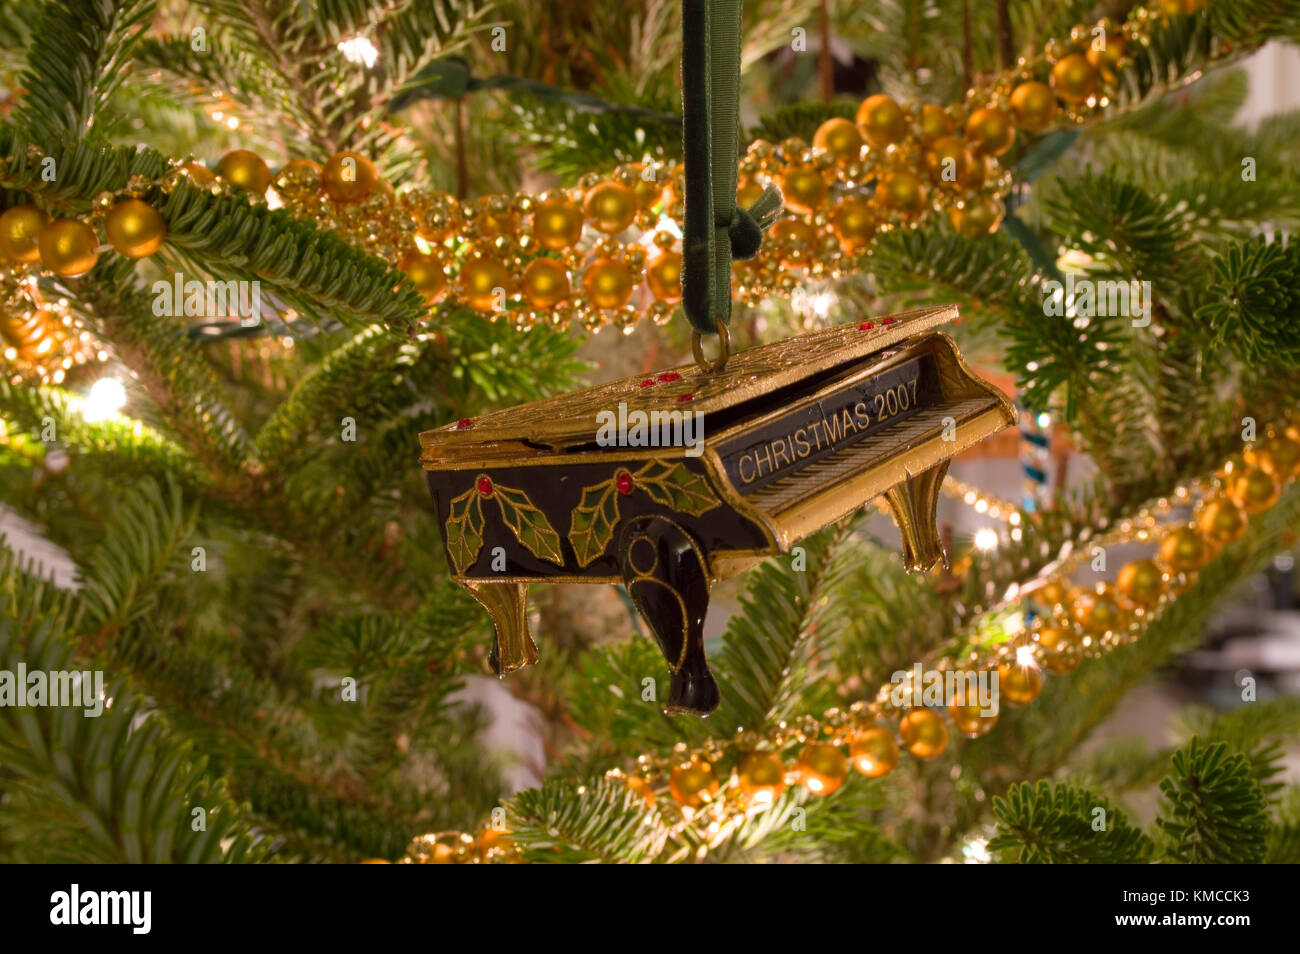 Grand piano christmas ornament hanging from tree Banque D'Images